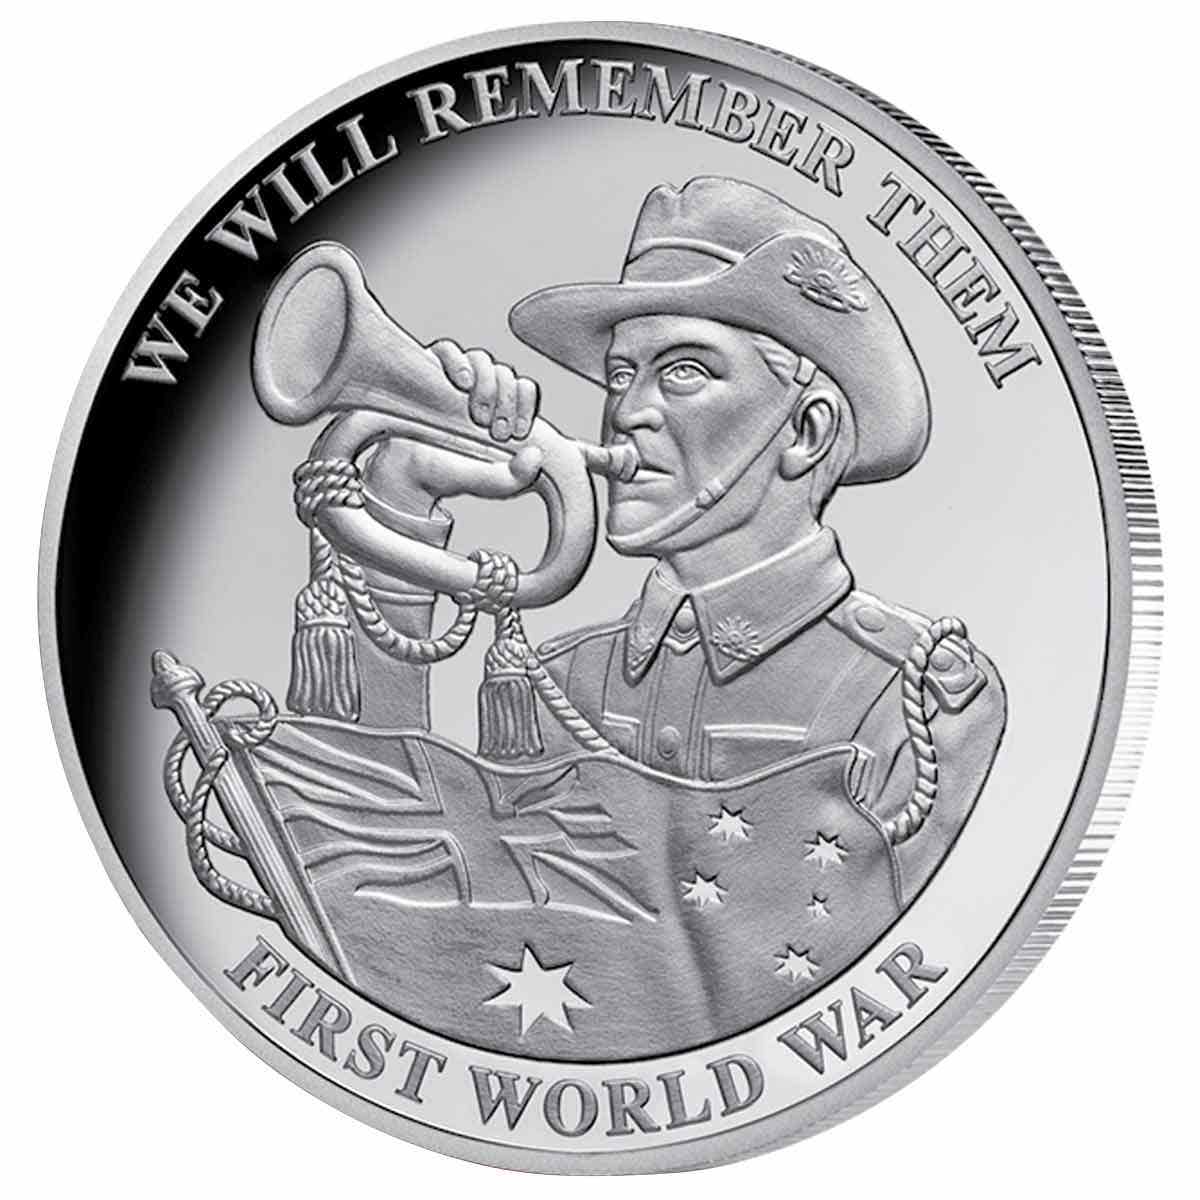 We Will Remember Them' Silver-plated Commemorative